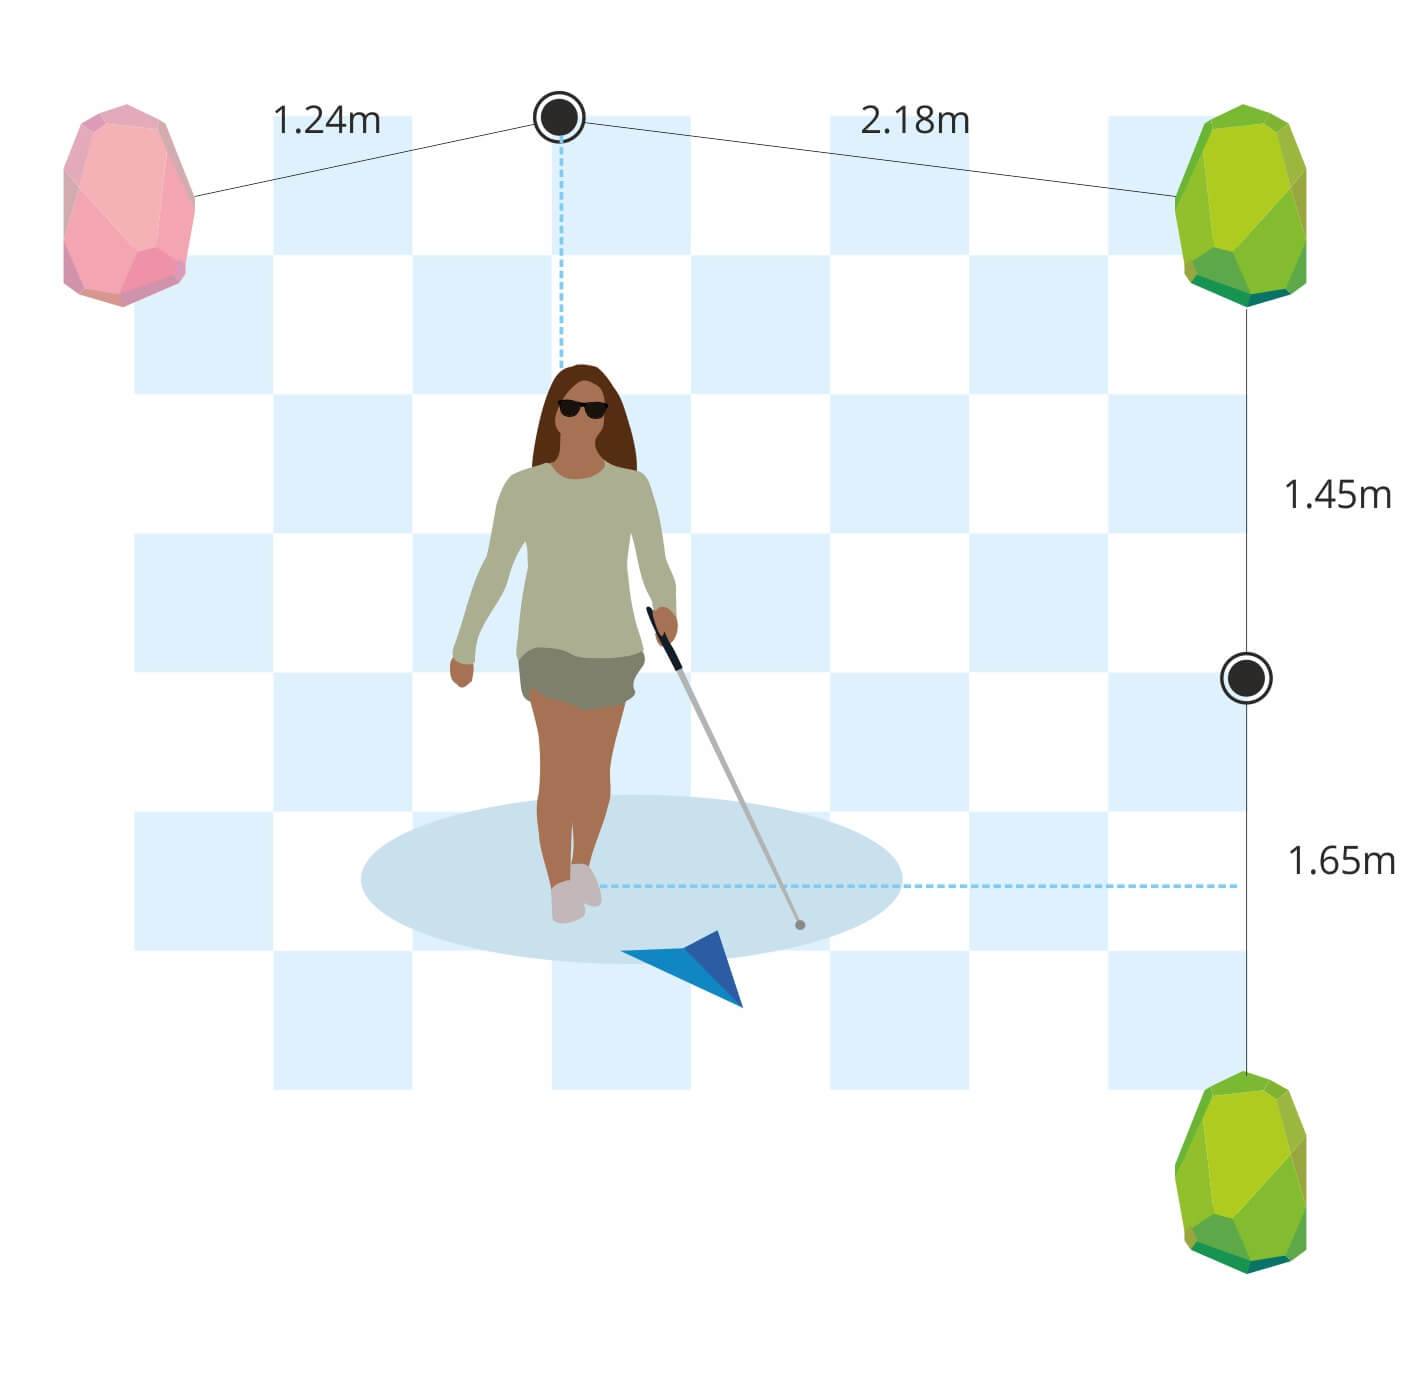 Visually Challenged Lady Walking with Bluetooth Beacons placed strategically